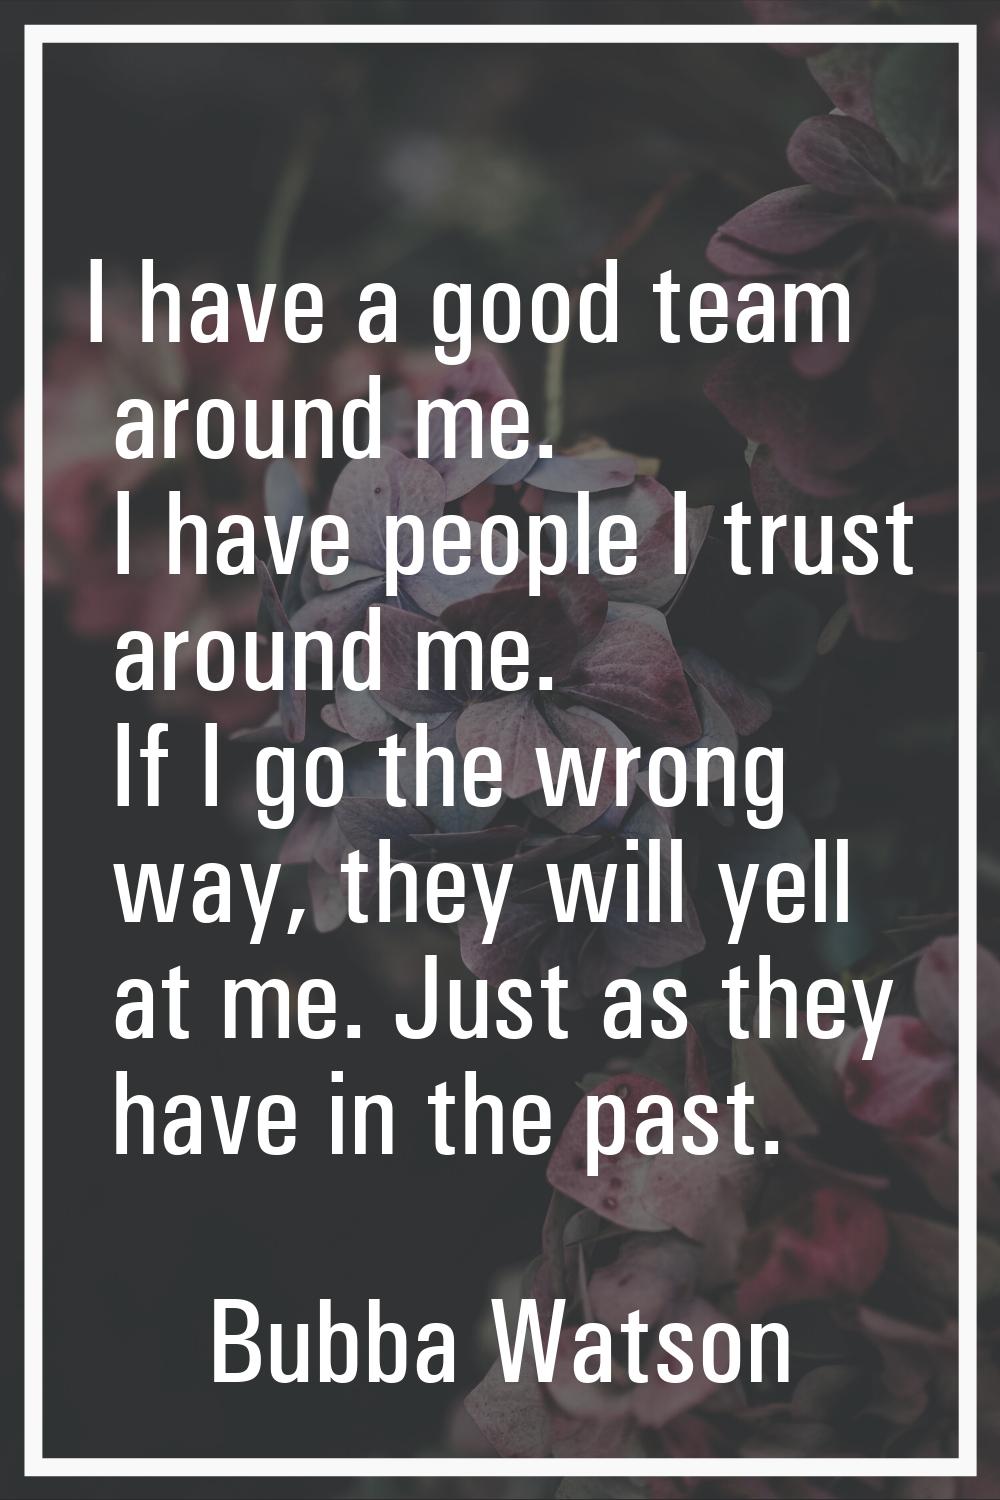 I have a good team around me. I have people I trust around me. If I go the wrong way, they will yel